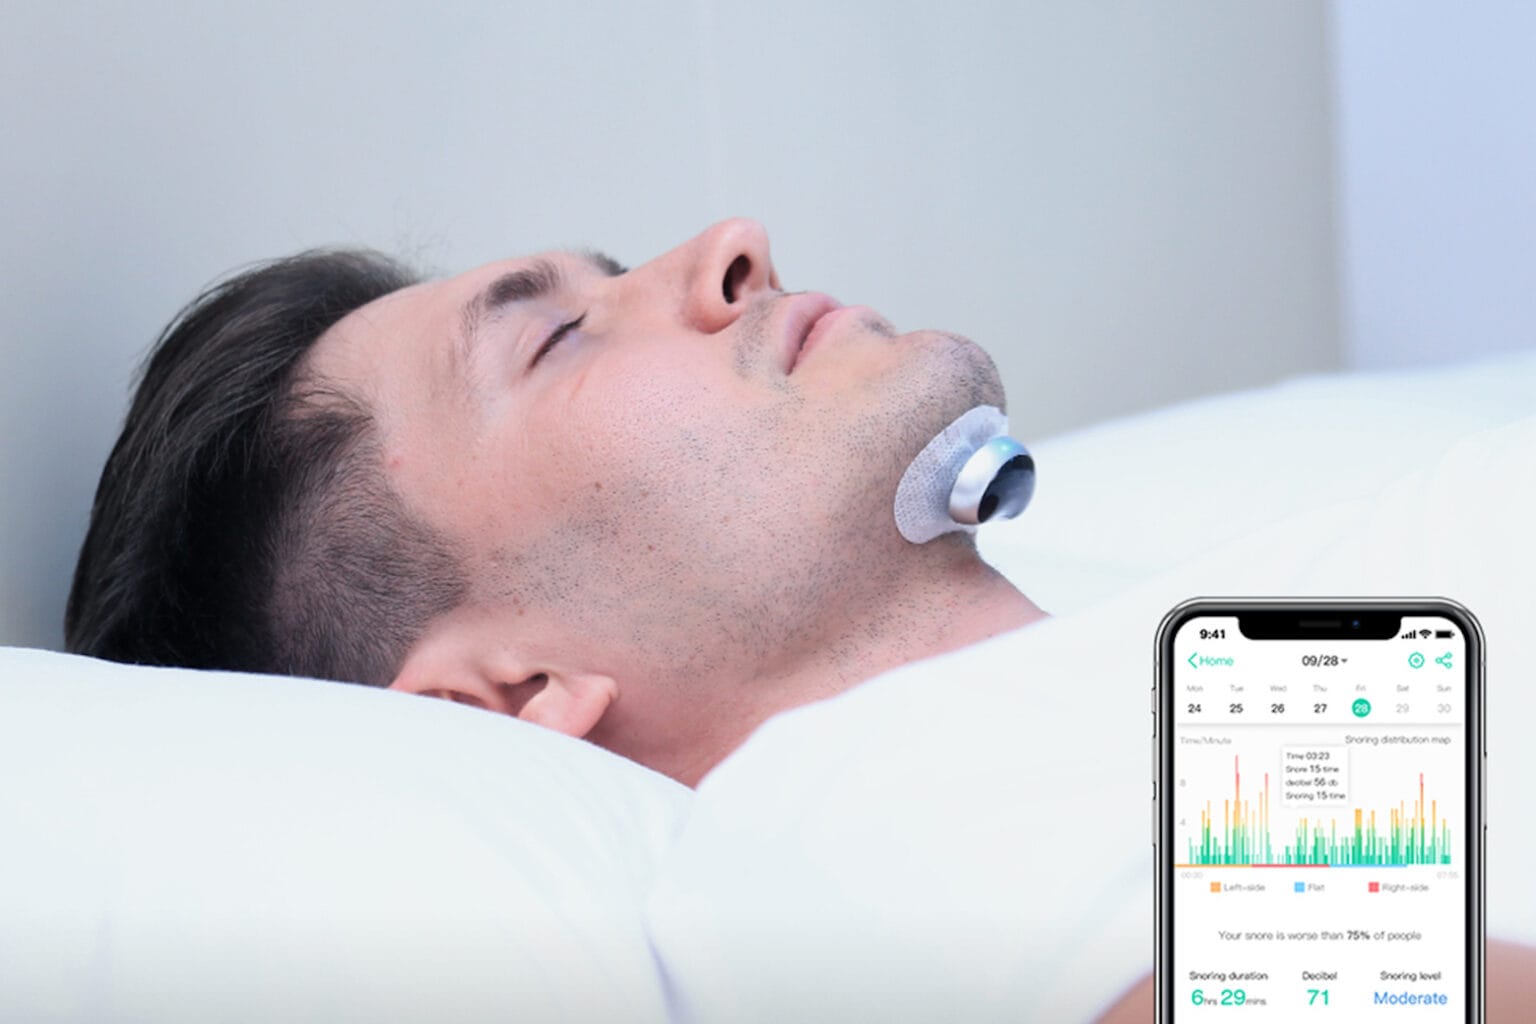 Get 15% off this anti-snore gadget and sleep better than ever.